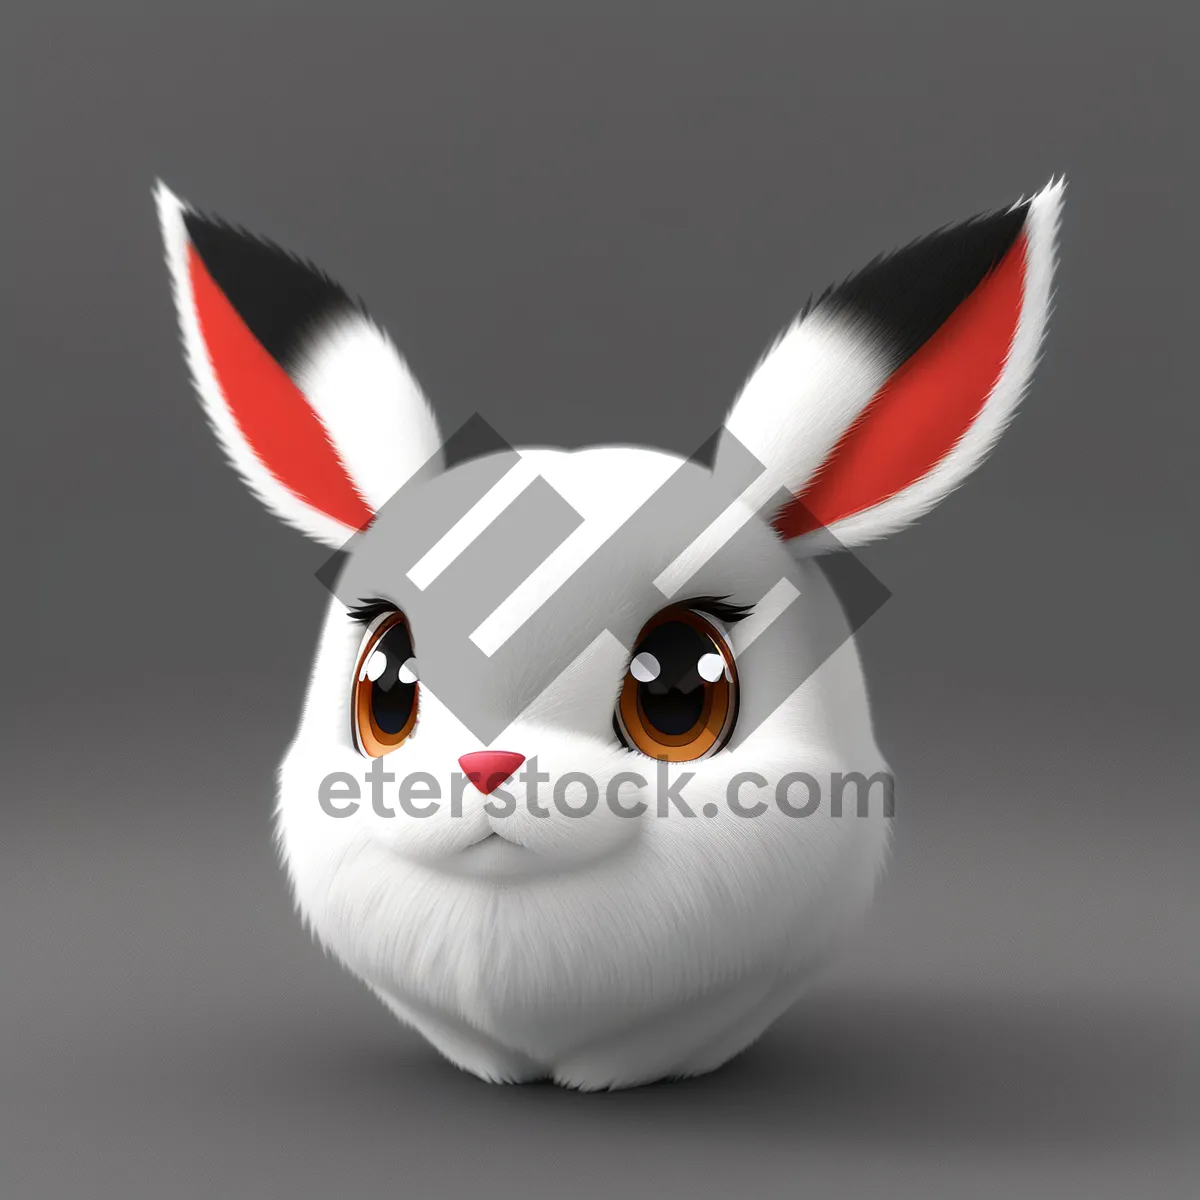 Picture of Cute Bunny Cartoon Image for Easter Fun